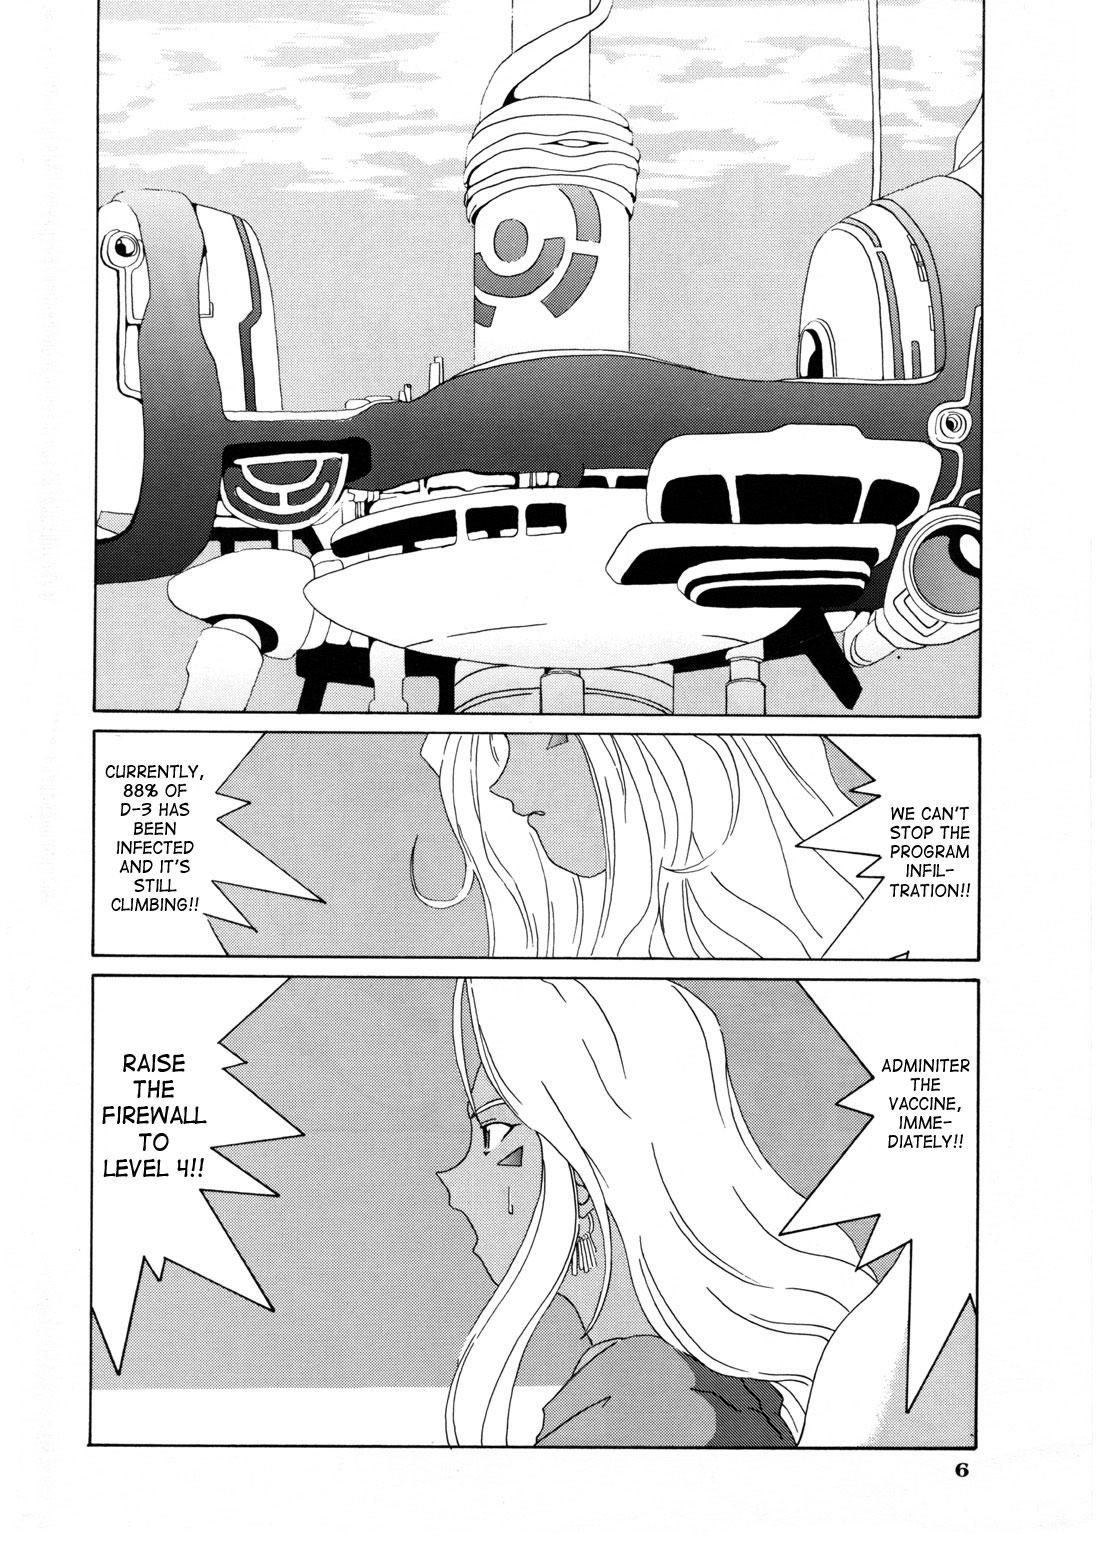 Beurette Nightmare of My Goddess Vol.3 - Ah my goddess Liveshow - Page 5